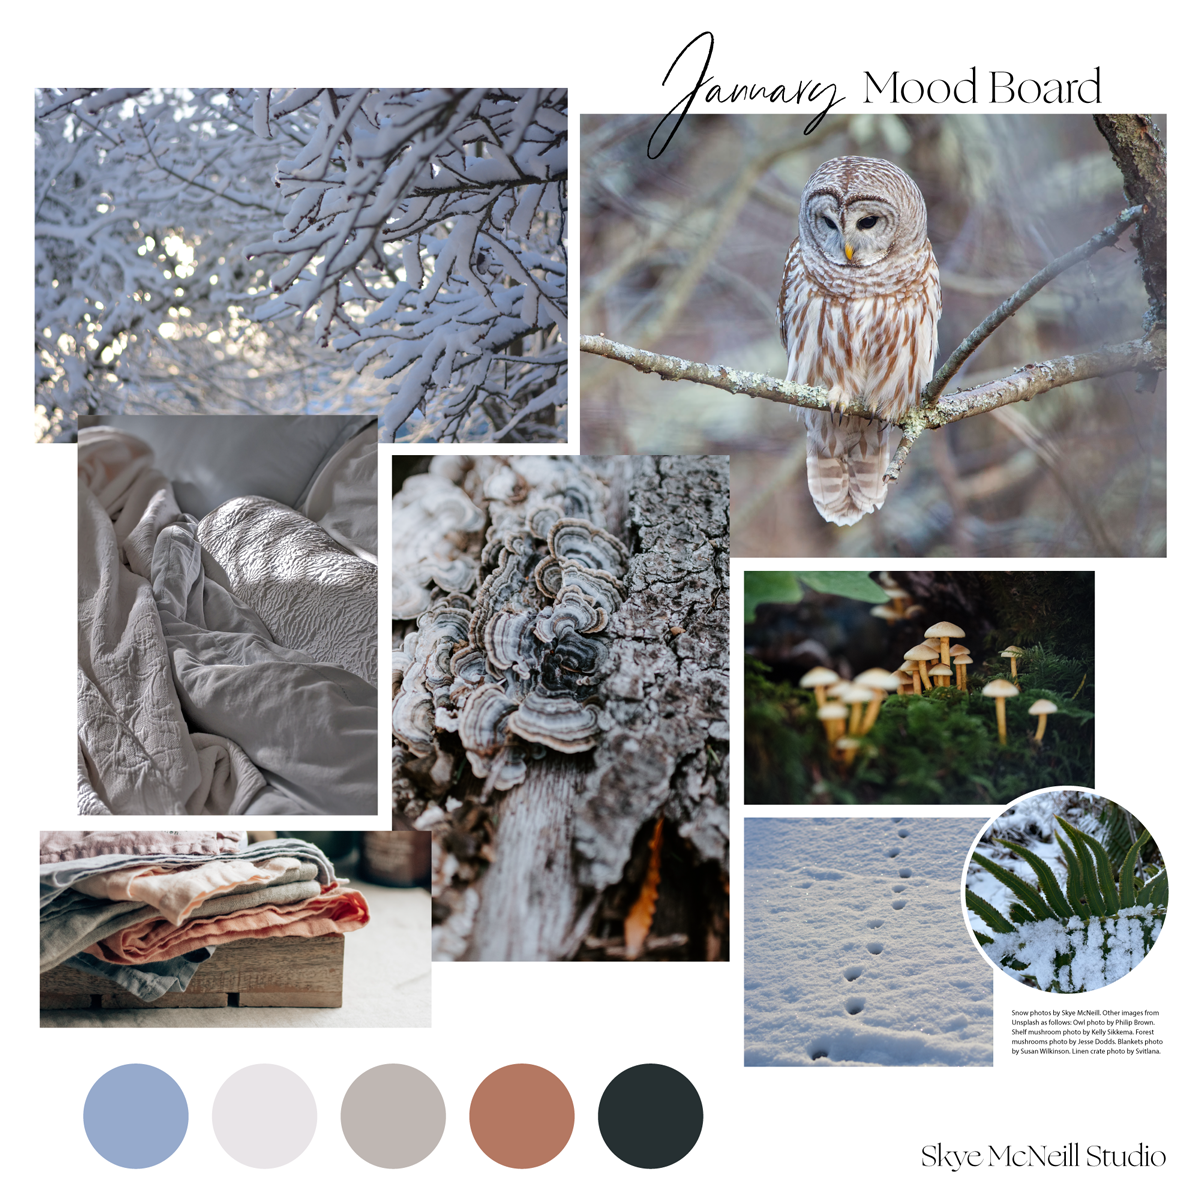 Image shows Skye's January mood board of winter themes. Collaged images are of fresh snow on a thicket of branches with pale morning light through them, a beautiful barred owl on a branch, a cluster of tiny mushrooms on a mossy forest floor, animal tracks in fresh snow, snow on a fern, a cascade of shelf mushrooms against tree bark, a pile of natural dye linens, and a pile of textured white linens with dappled sunlight on them. At the bottom is a five swatch color palette of an icy blue, a soft white, a taupe, a copper brown and a dark green-gray, all pulled from tones in the photographs. Text reads "January Mood Board" at the top and "Skye McNeill Studio" at the bottom, along with image credits to Skye and from Unsplash photographers: Philip Brown, Kelly Sikkema, Jesse Dodds, Susan Wilkinson and Svetlana.